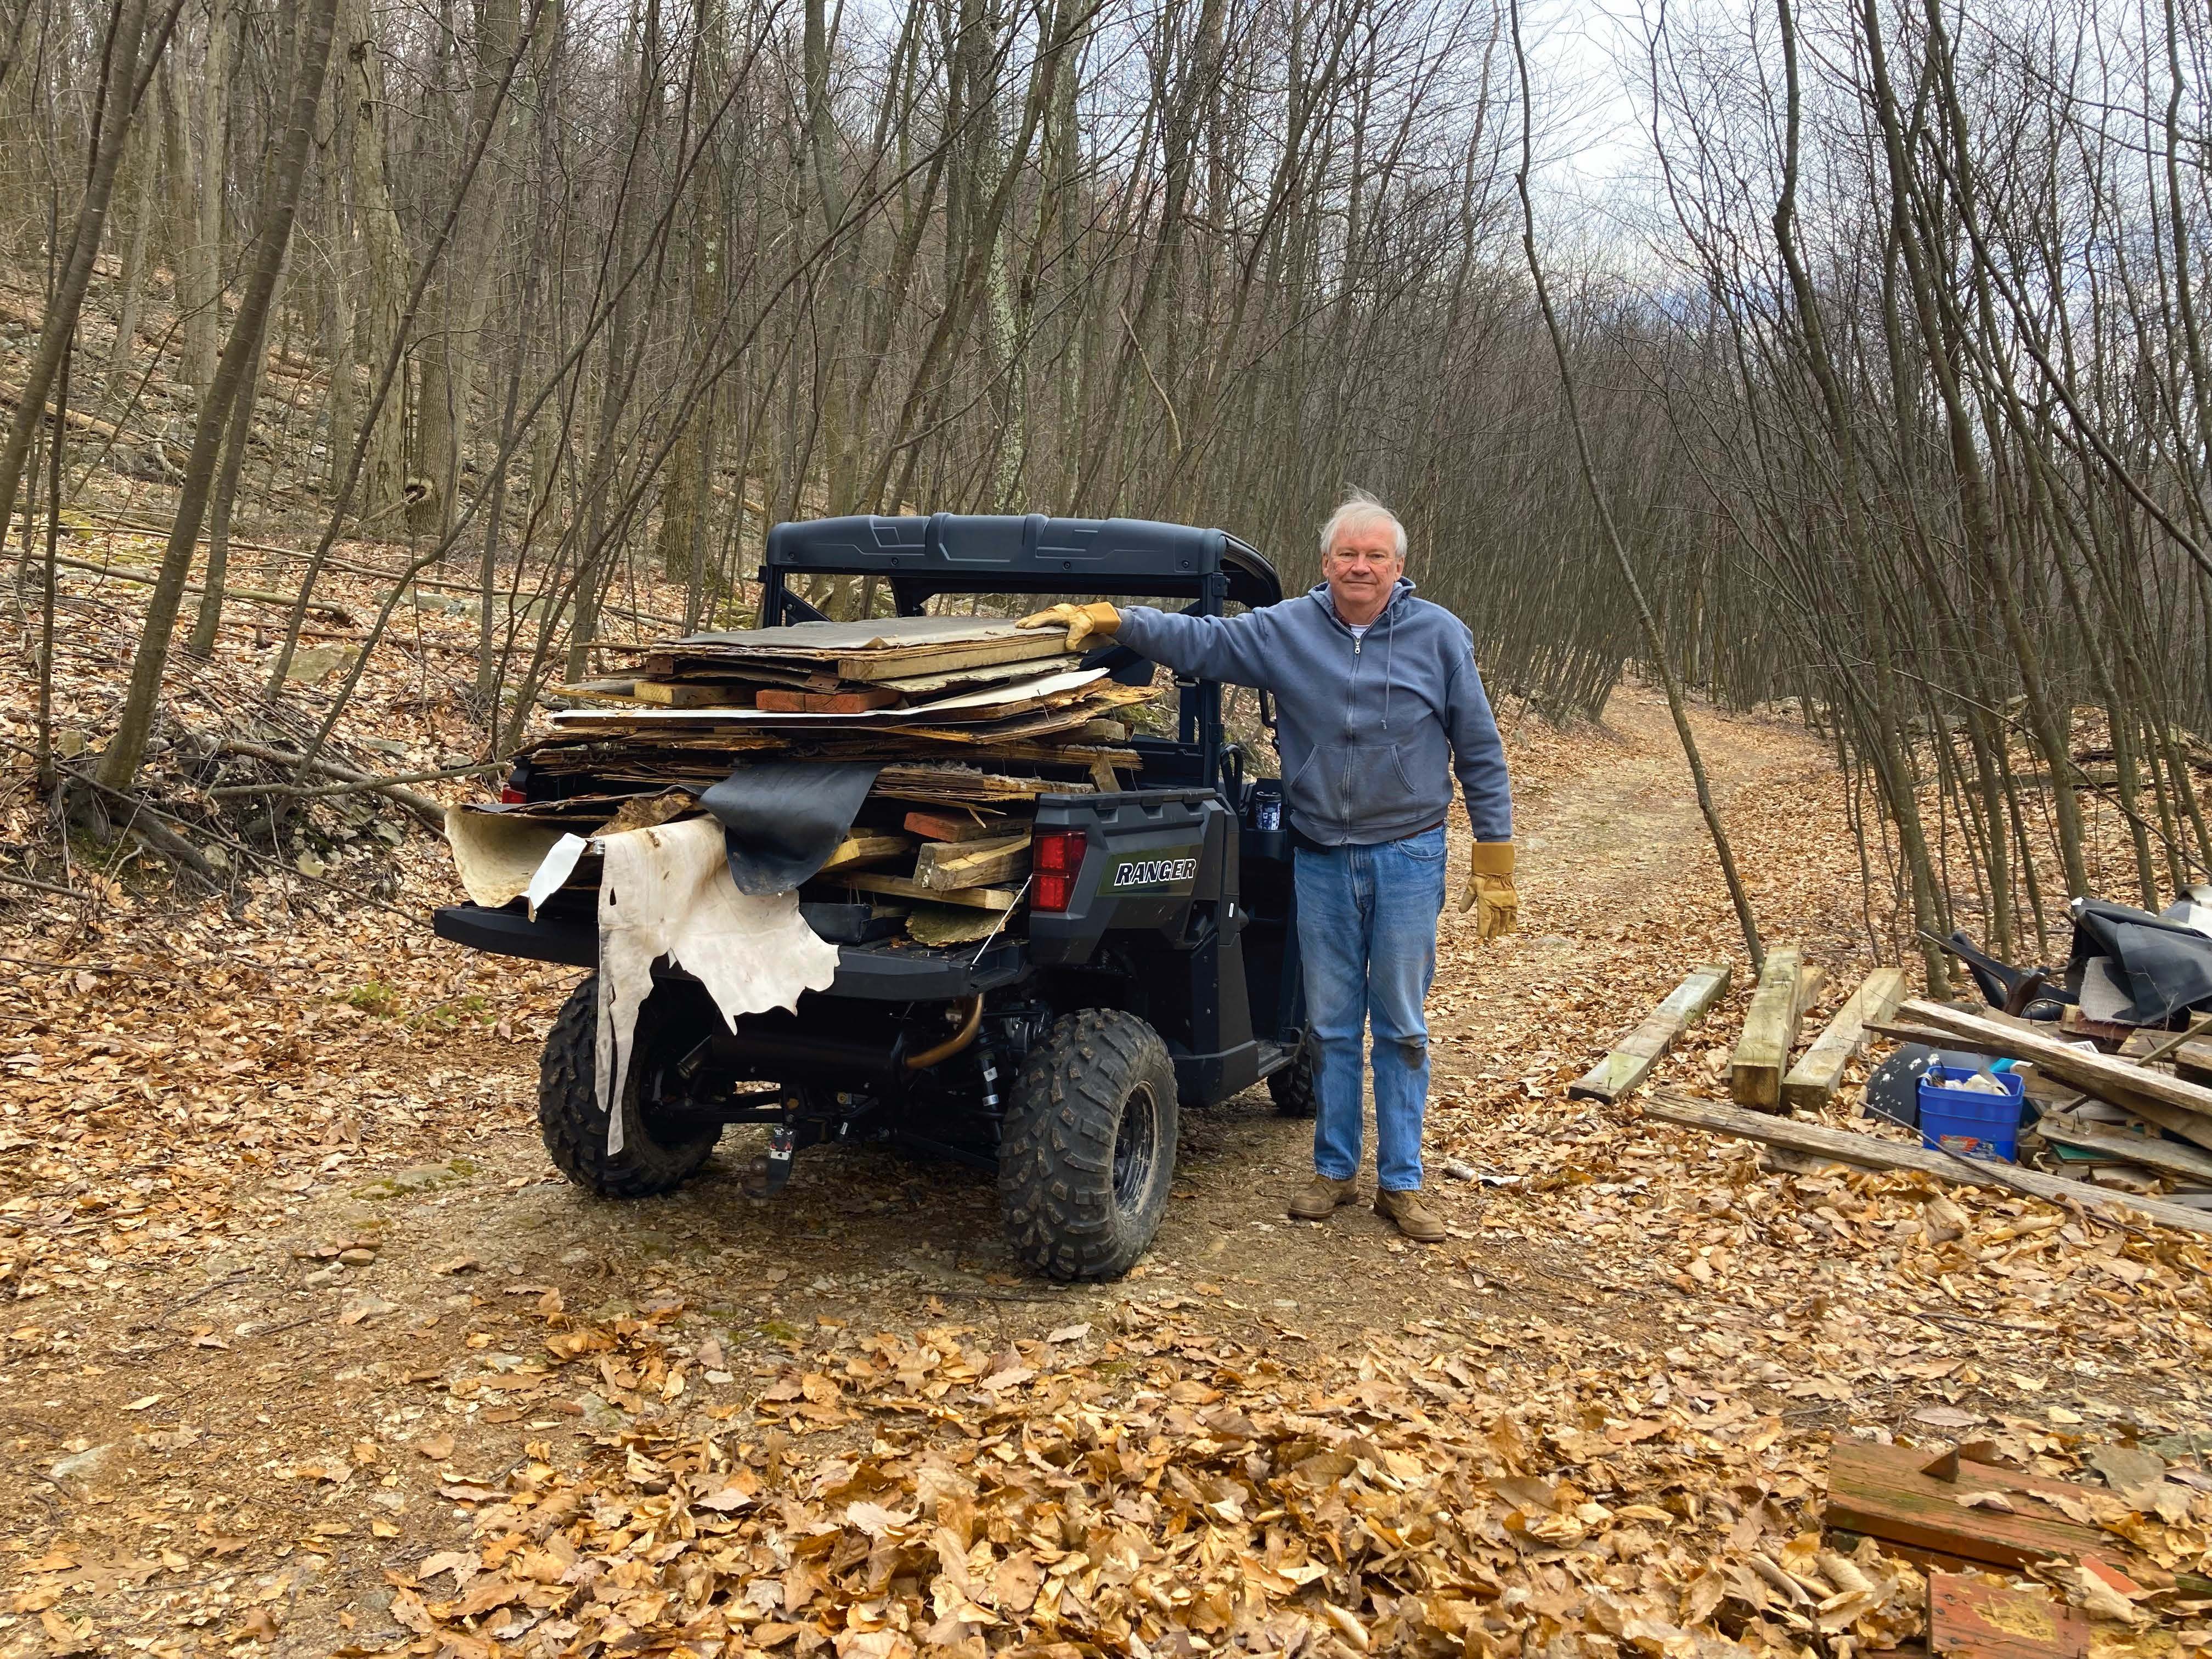 A person stands next to a vehicle with large piles of wood in the trunk in the forest.